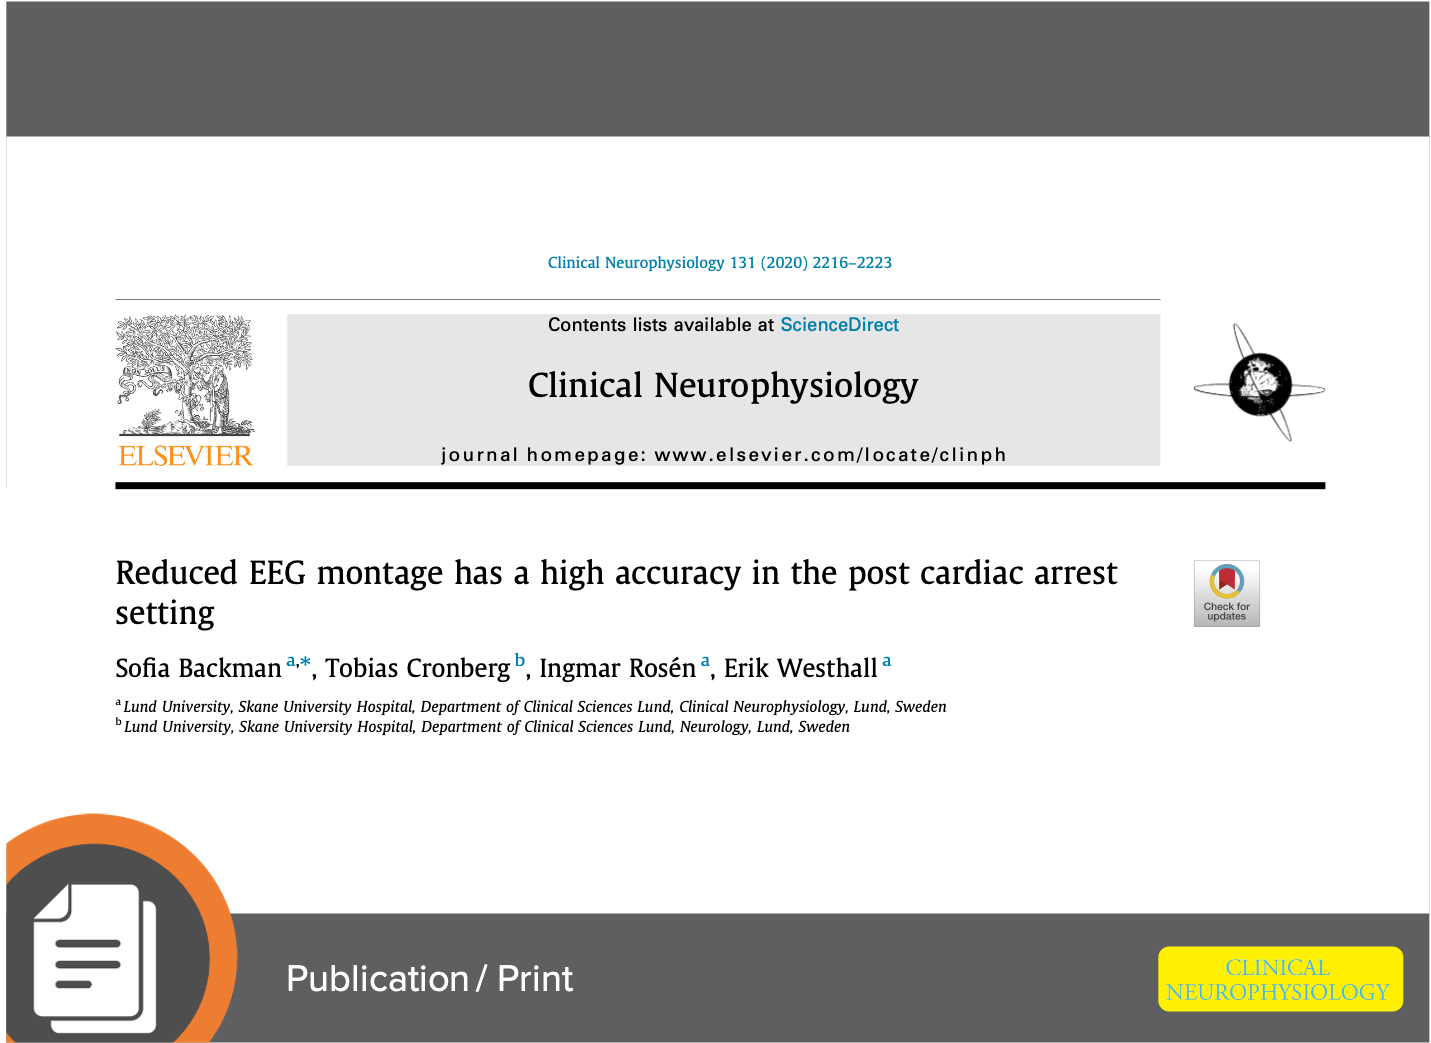 Rapid EEG for Cardiac Arrest Patients Manuscript: Reduced EEG Montage Has A High Accuracy In the Post Cardiac Arrest Setting